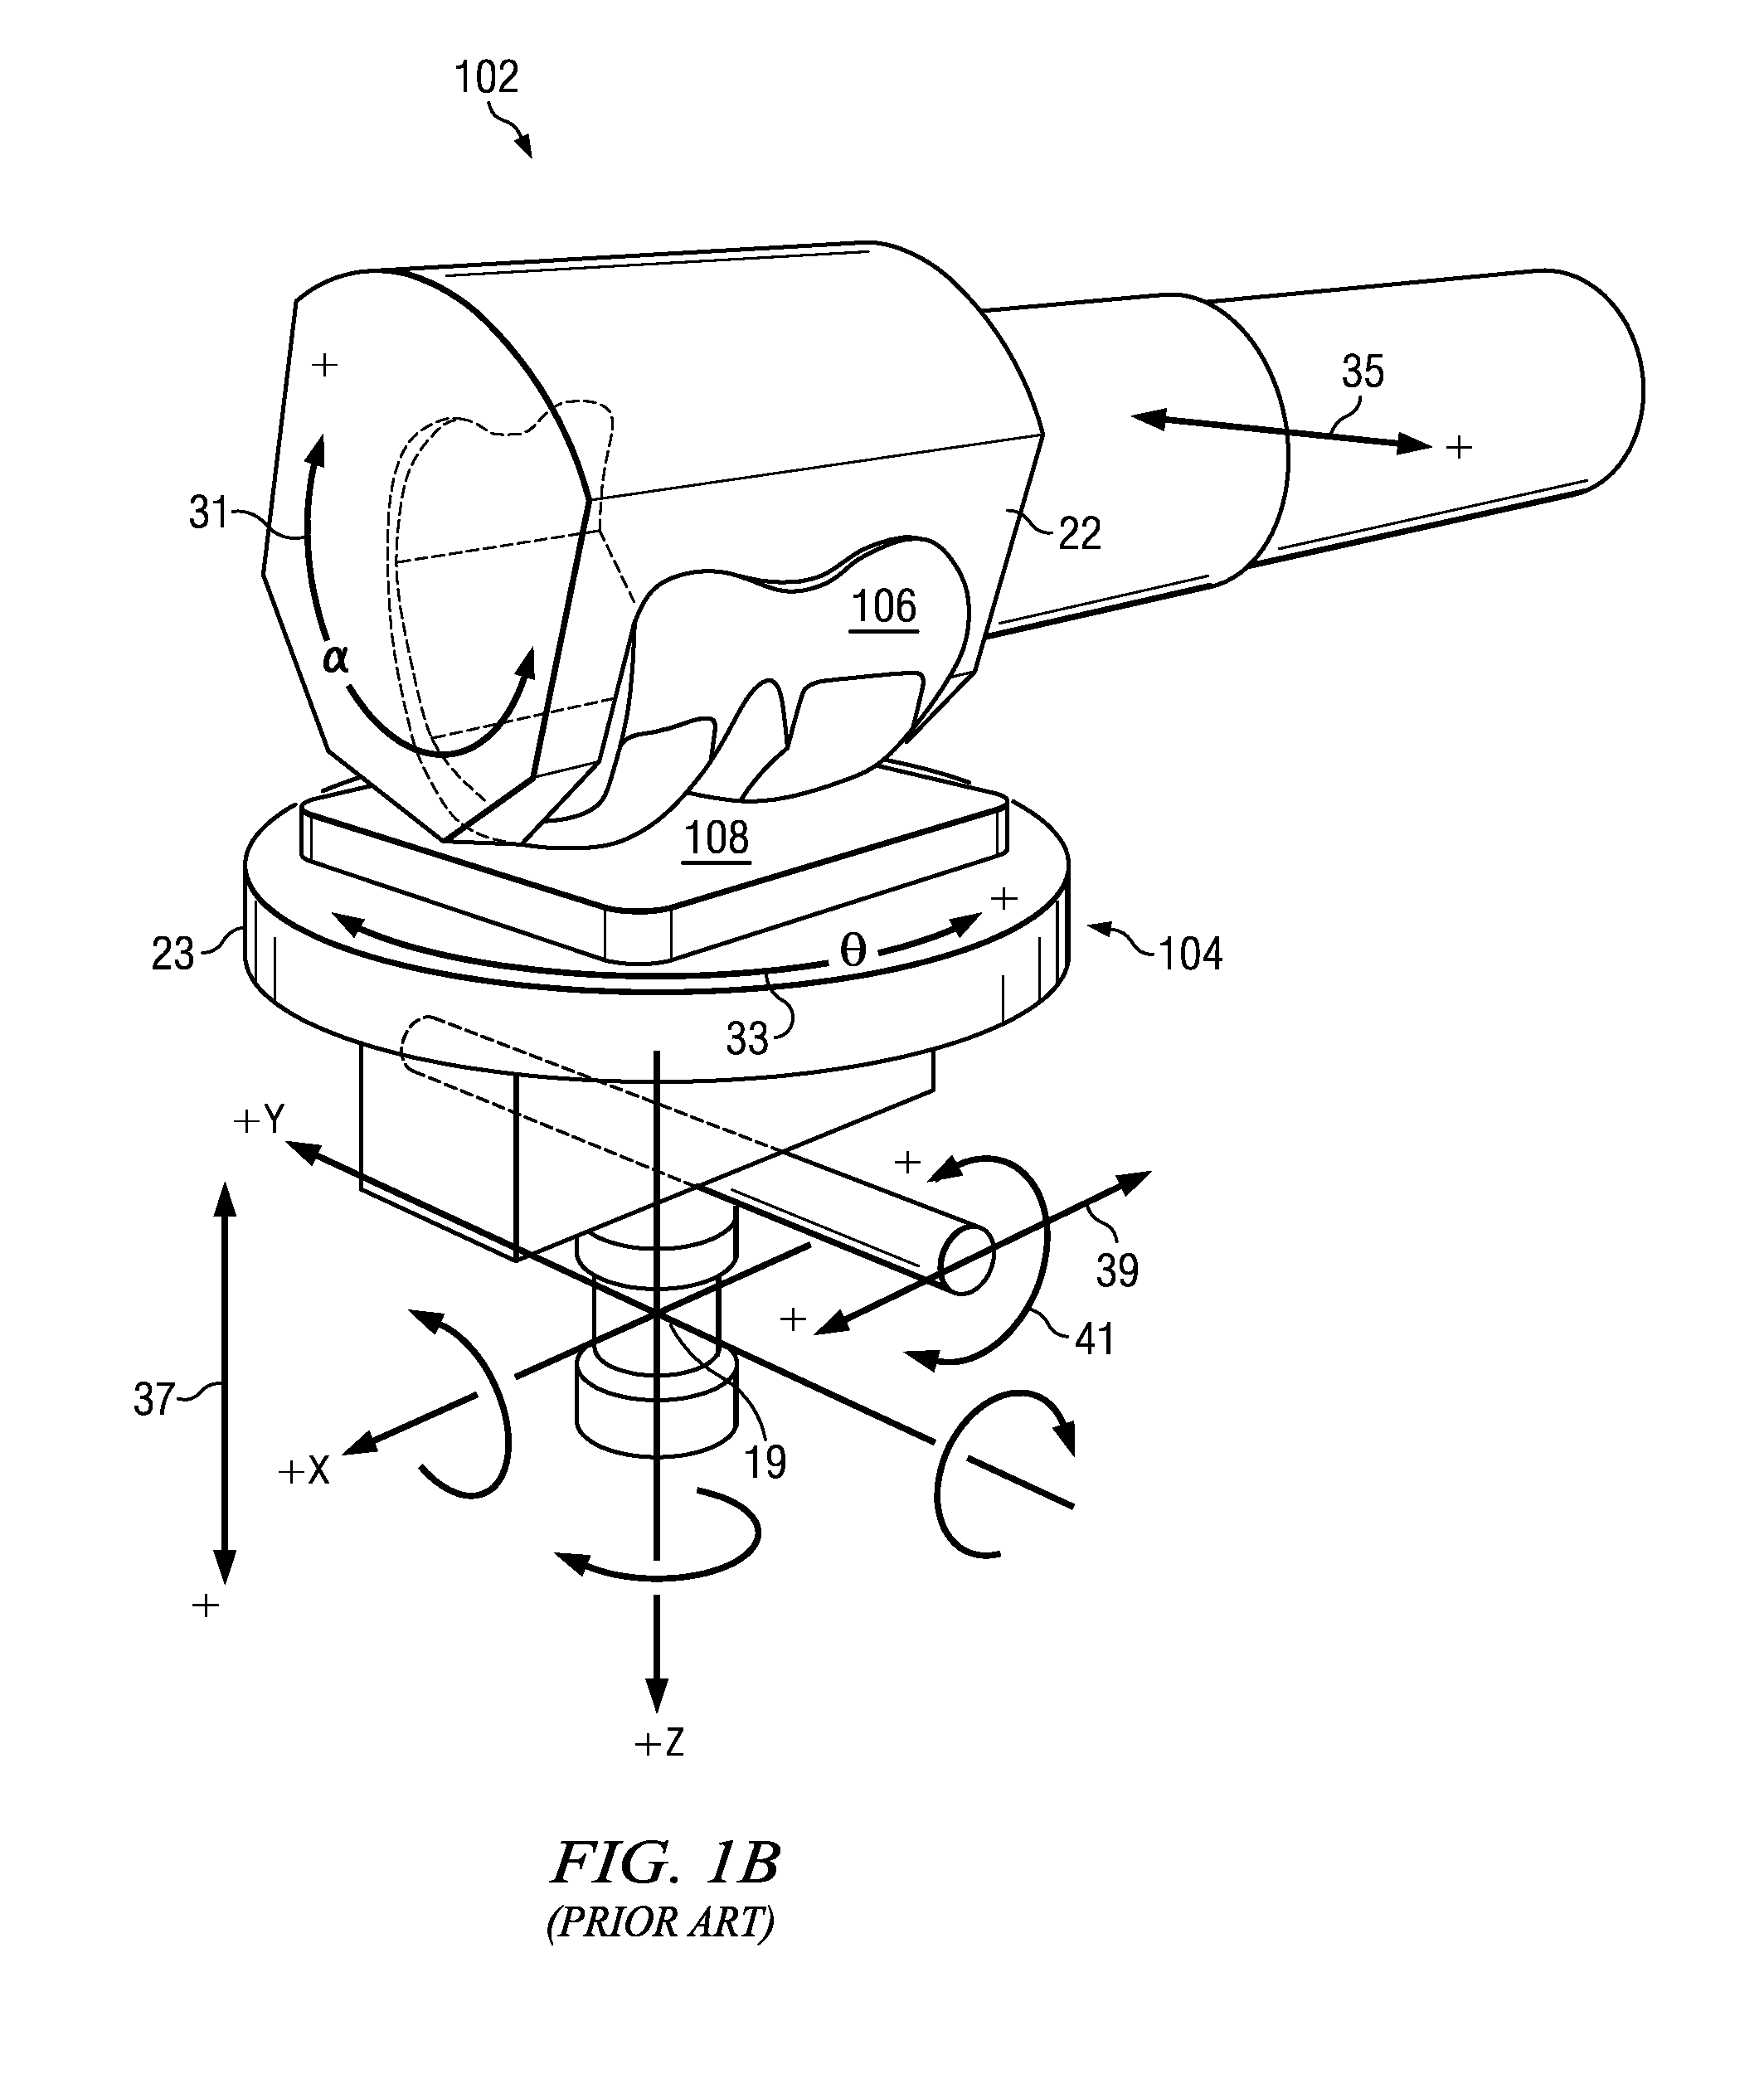 Method and apparatus for joint motion simulation